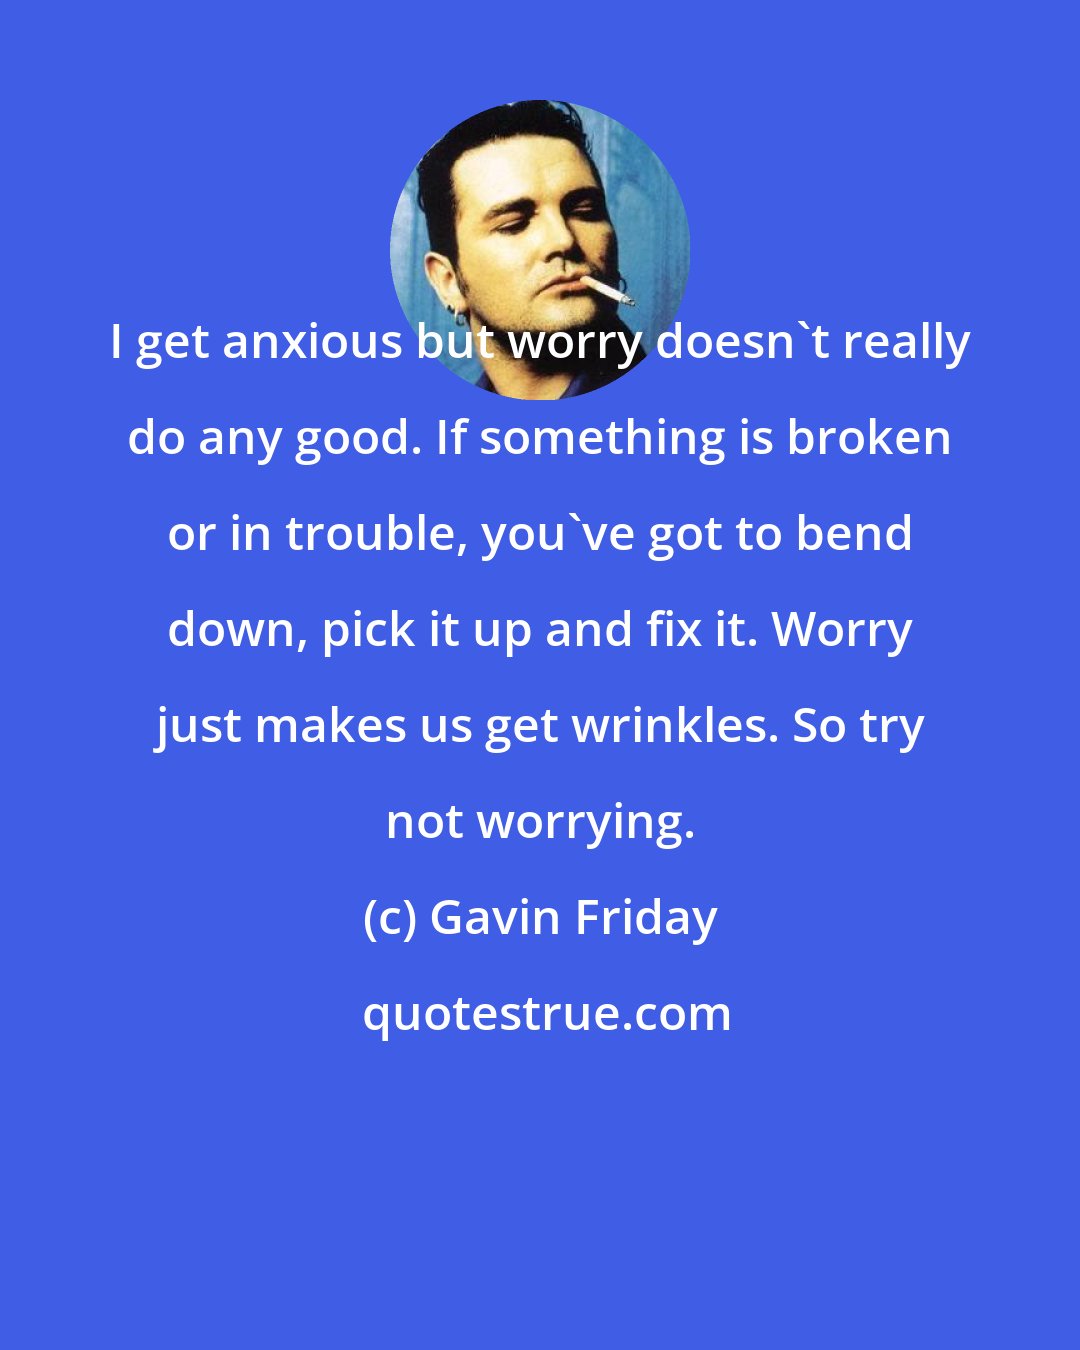 Gavin Friday: I get anxious but worry doesn't really do any good. If something is broken or in trouble, you've got to bend down, pick it up and fix it. Worry just makes us get wrinkles. So try not worrying.